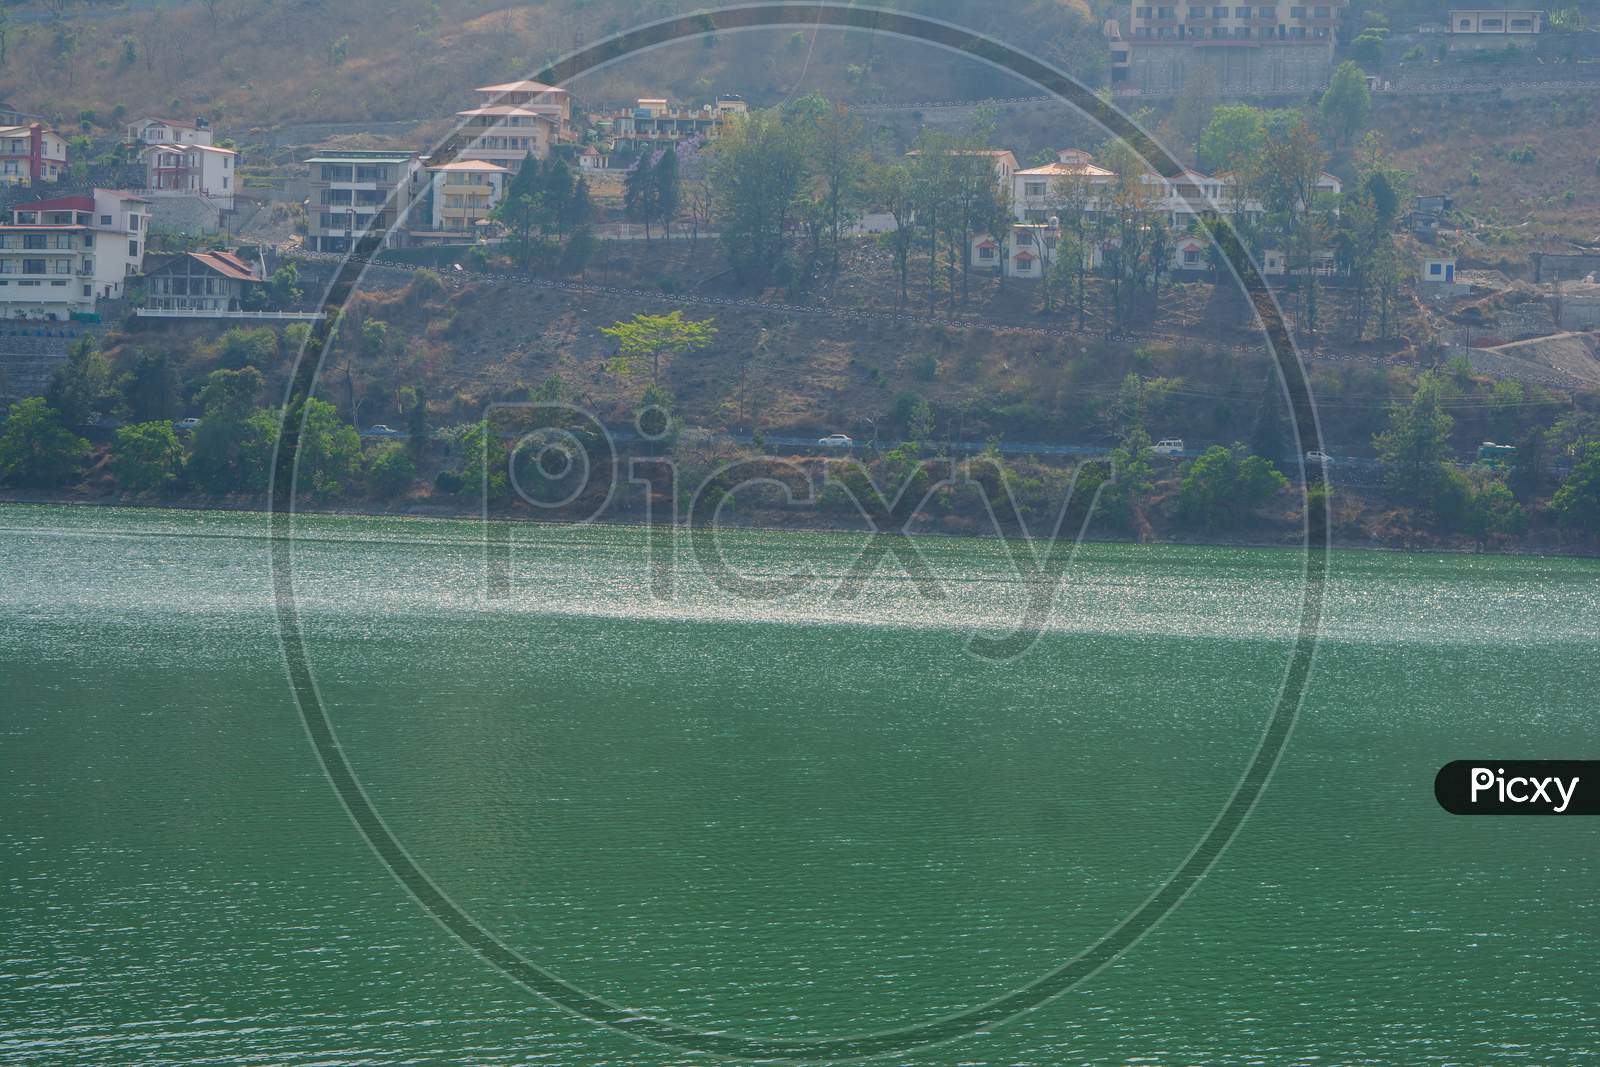 Beautiful Bhimtal Lake is a lake in the town of Bhimtal, in the Indian state of Uttarakhand